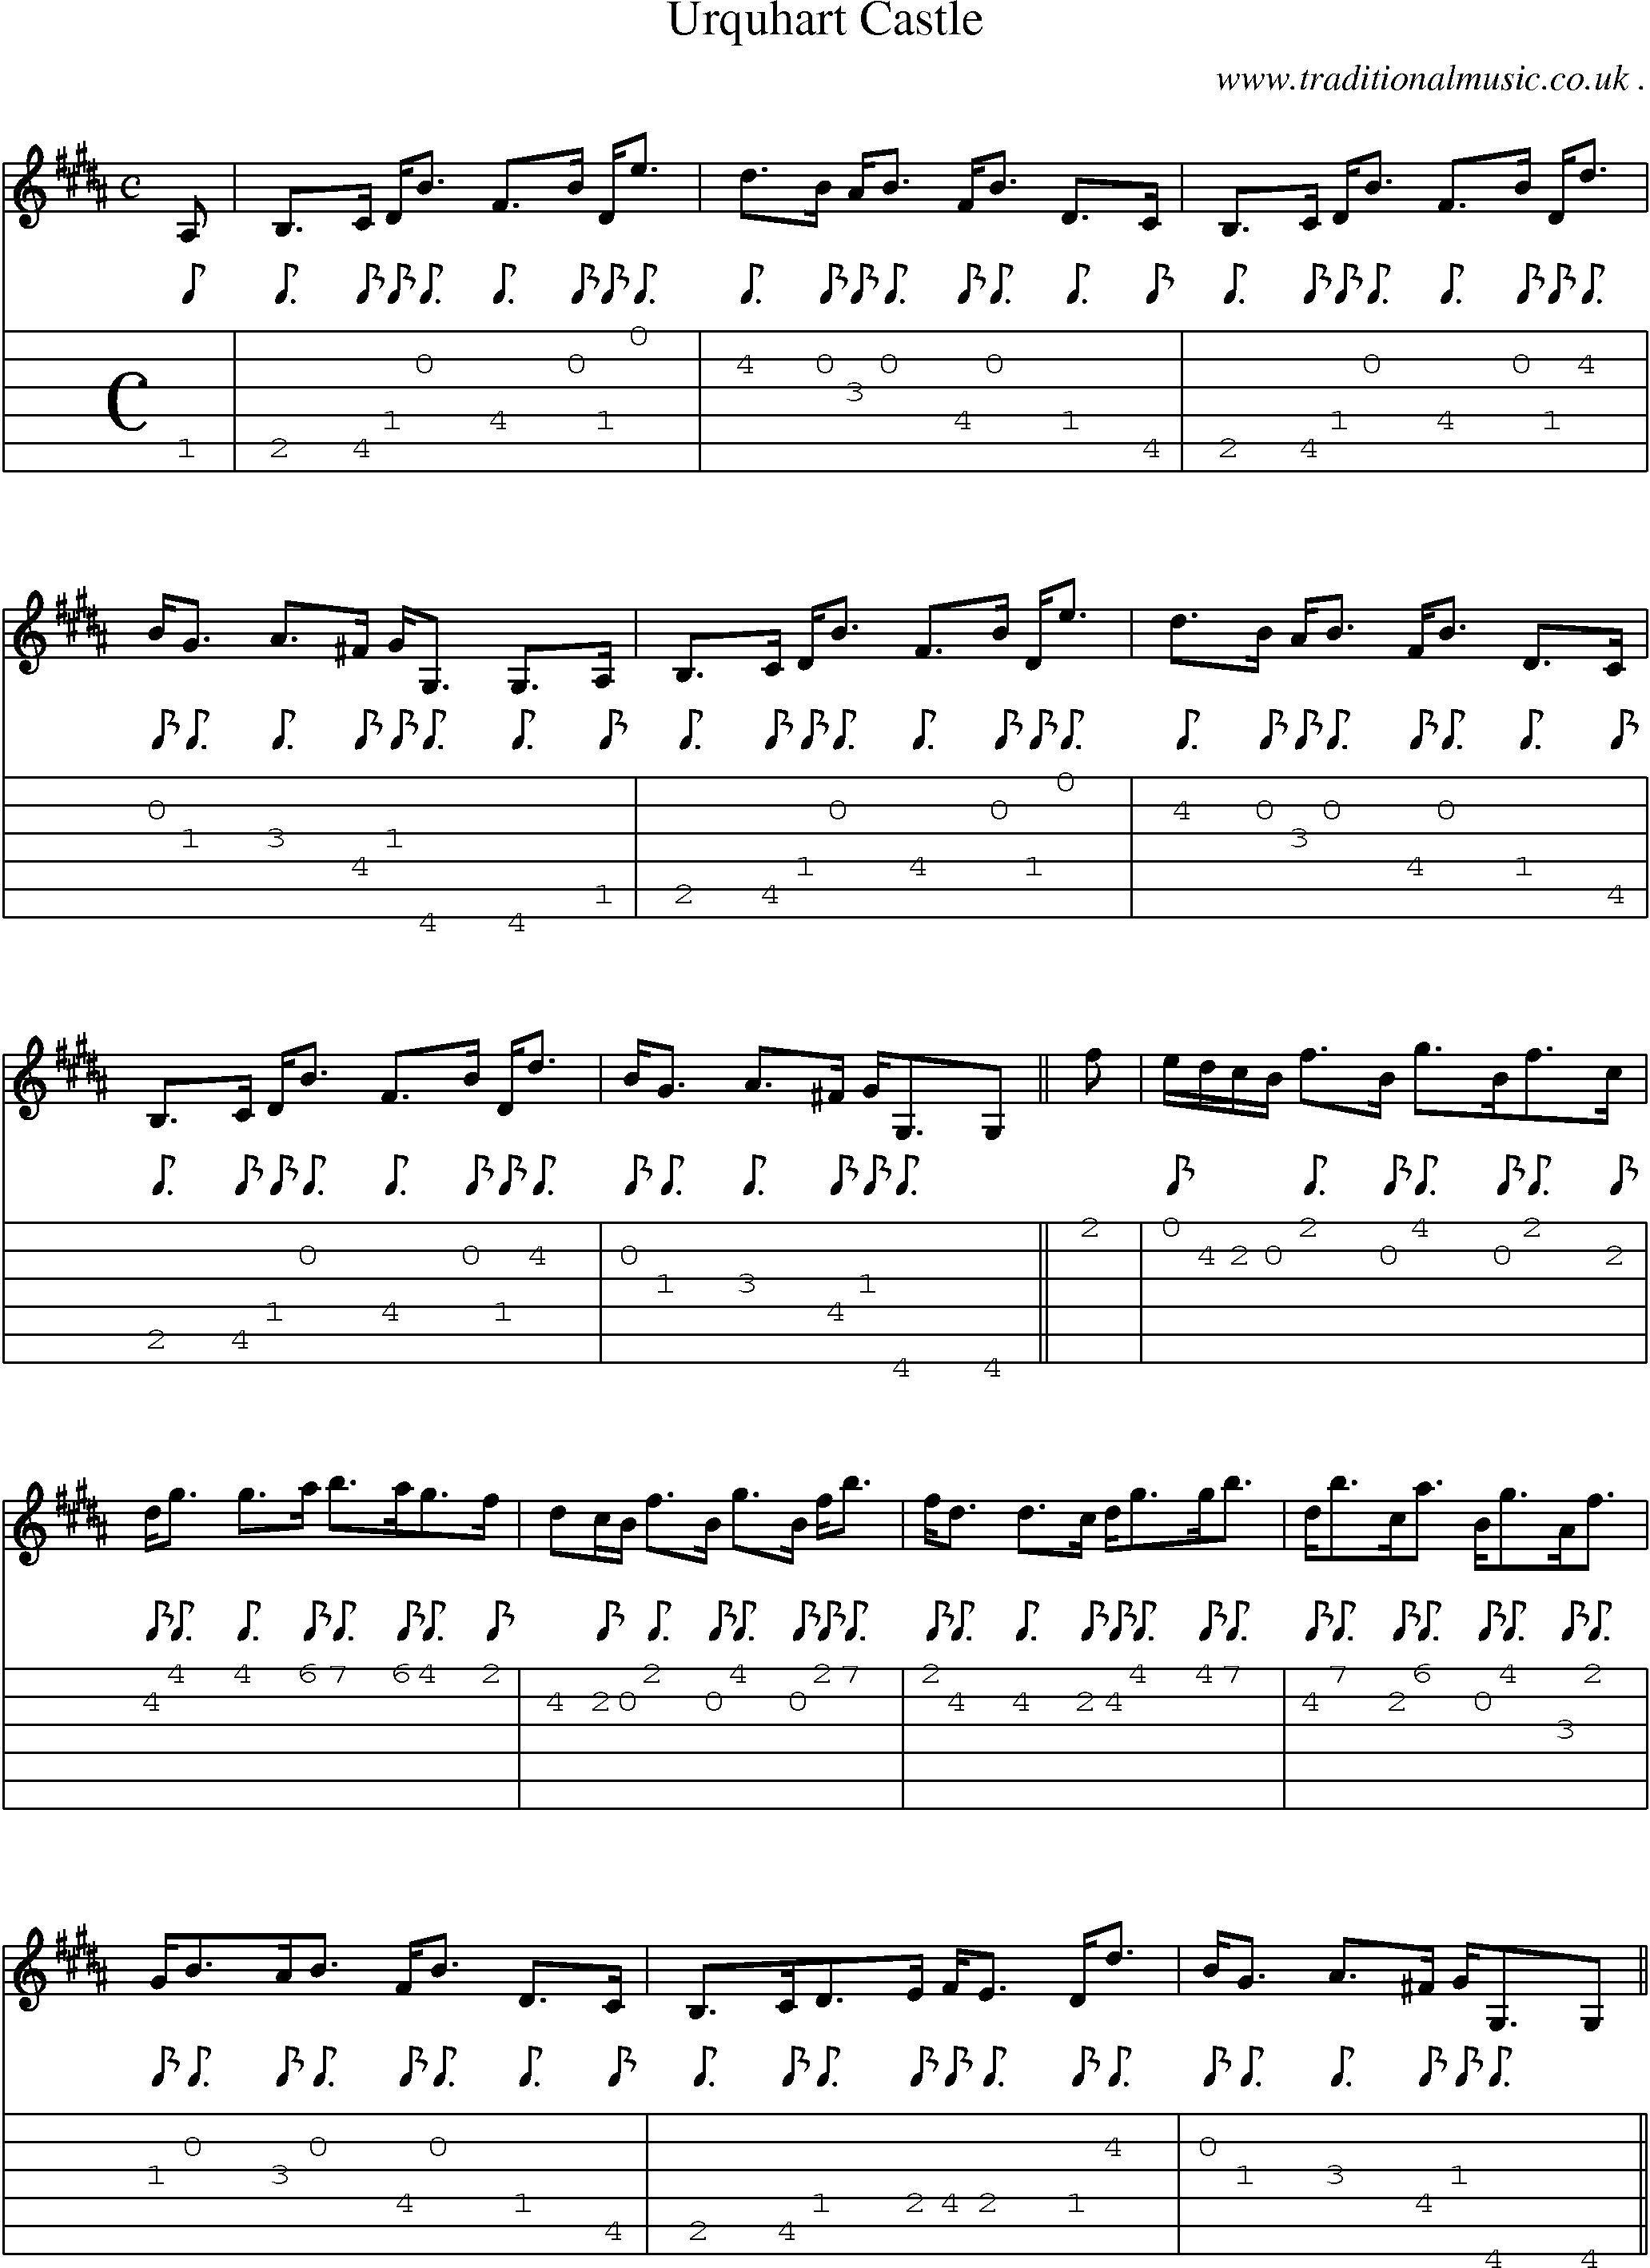 Sheet-music  score, Chords and Guitar Tabs for Urquhart Castle